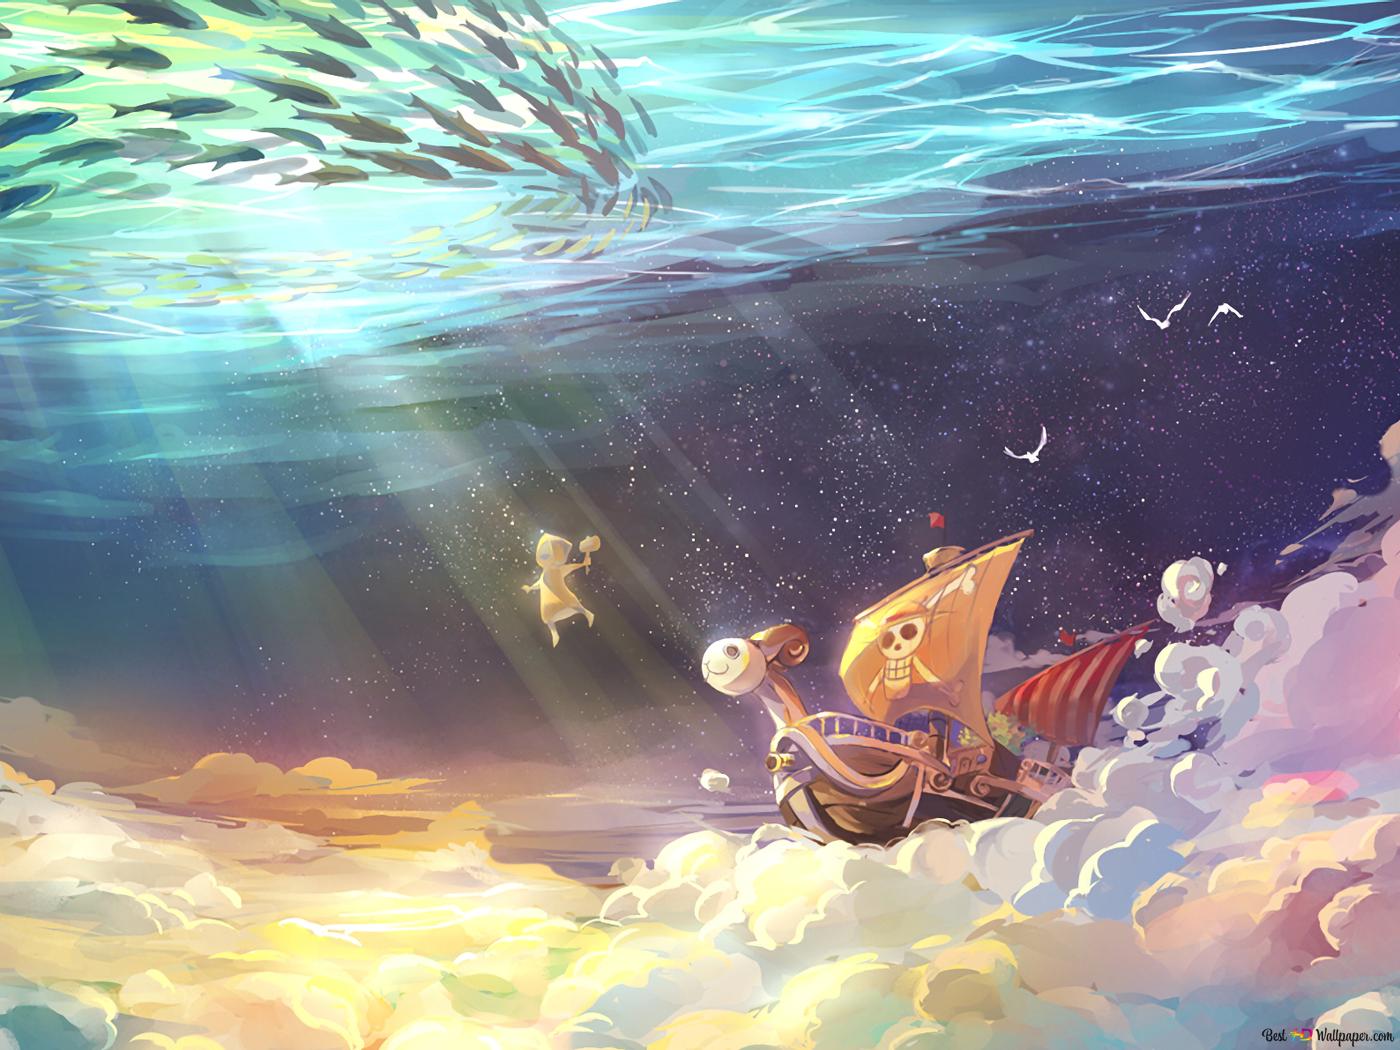 One Piece Wallpapers - Wallpaper Cave | anime, one piece, clouds, sky, sea, ship, fish, seagulls, one piece, clouds, sky, sea, ship, fish, seagulls - One Piece